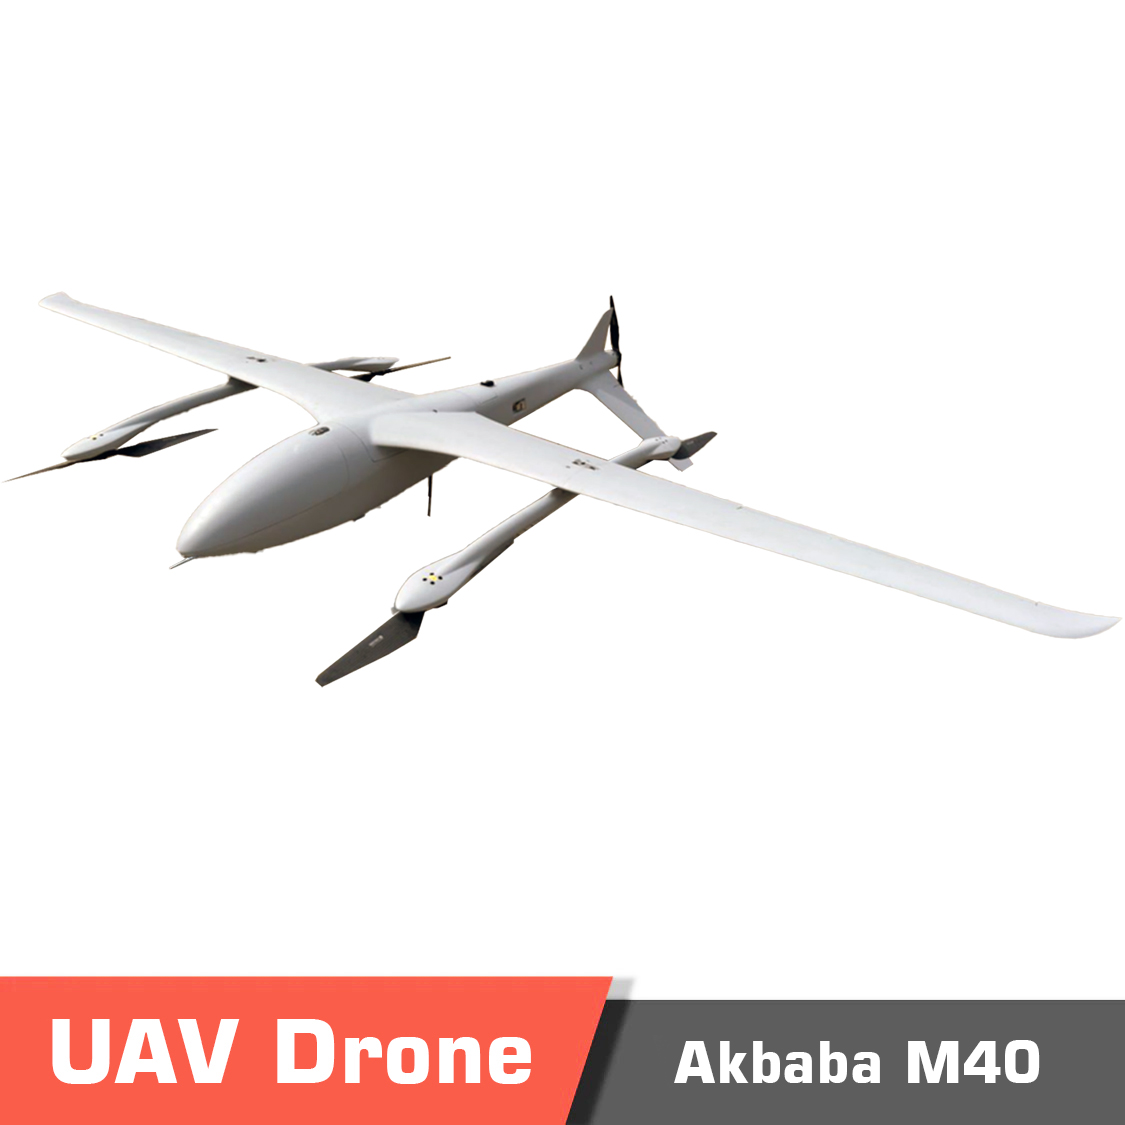 Akbaba1 - me-216,me-216 vtol,long endurance,fixedwing uav,cargo drone,wind resistance,detachable load,mapping drone,detachable payload,surveying drone,fixed-wing uav,heavy lift drone,vertical take-off,vertical landing,redundant sensors,four-axis,eight-propeller rotor,low temperature resistance - motionew - 1